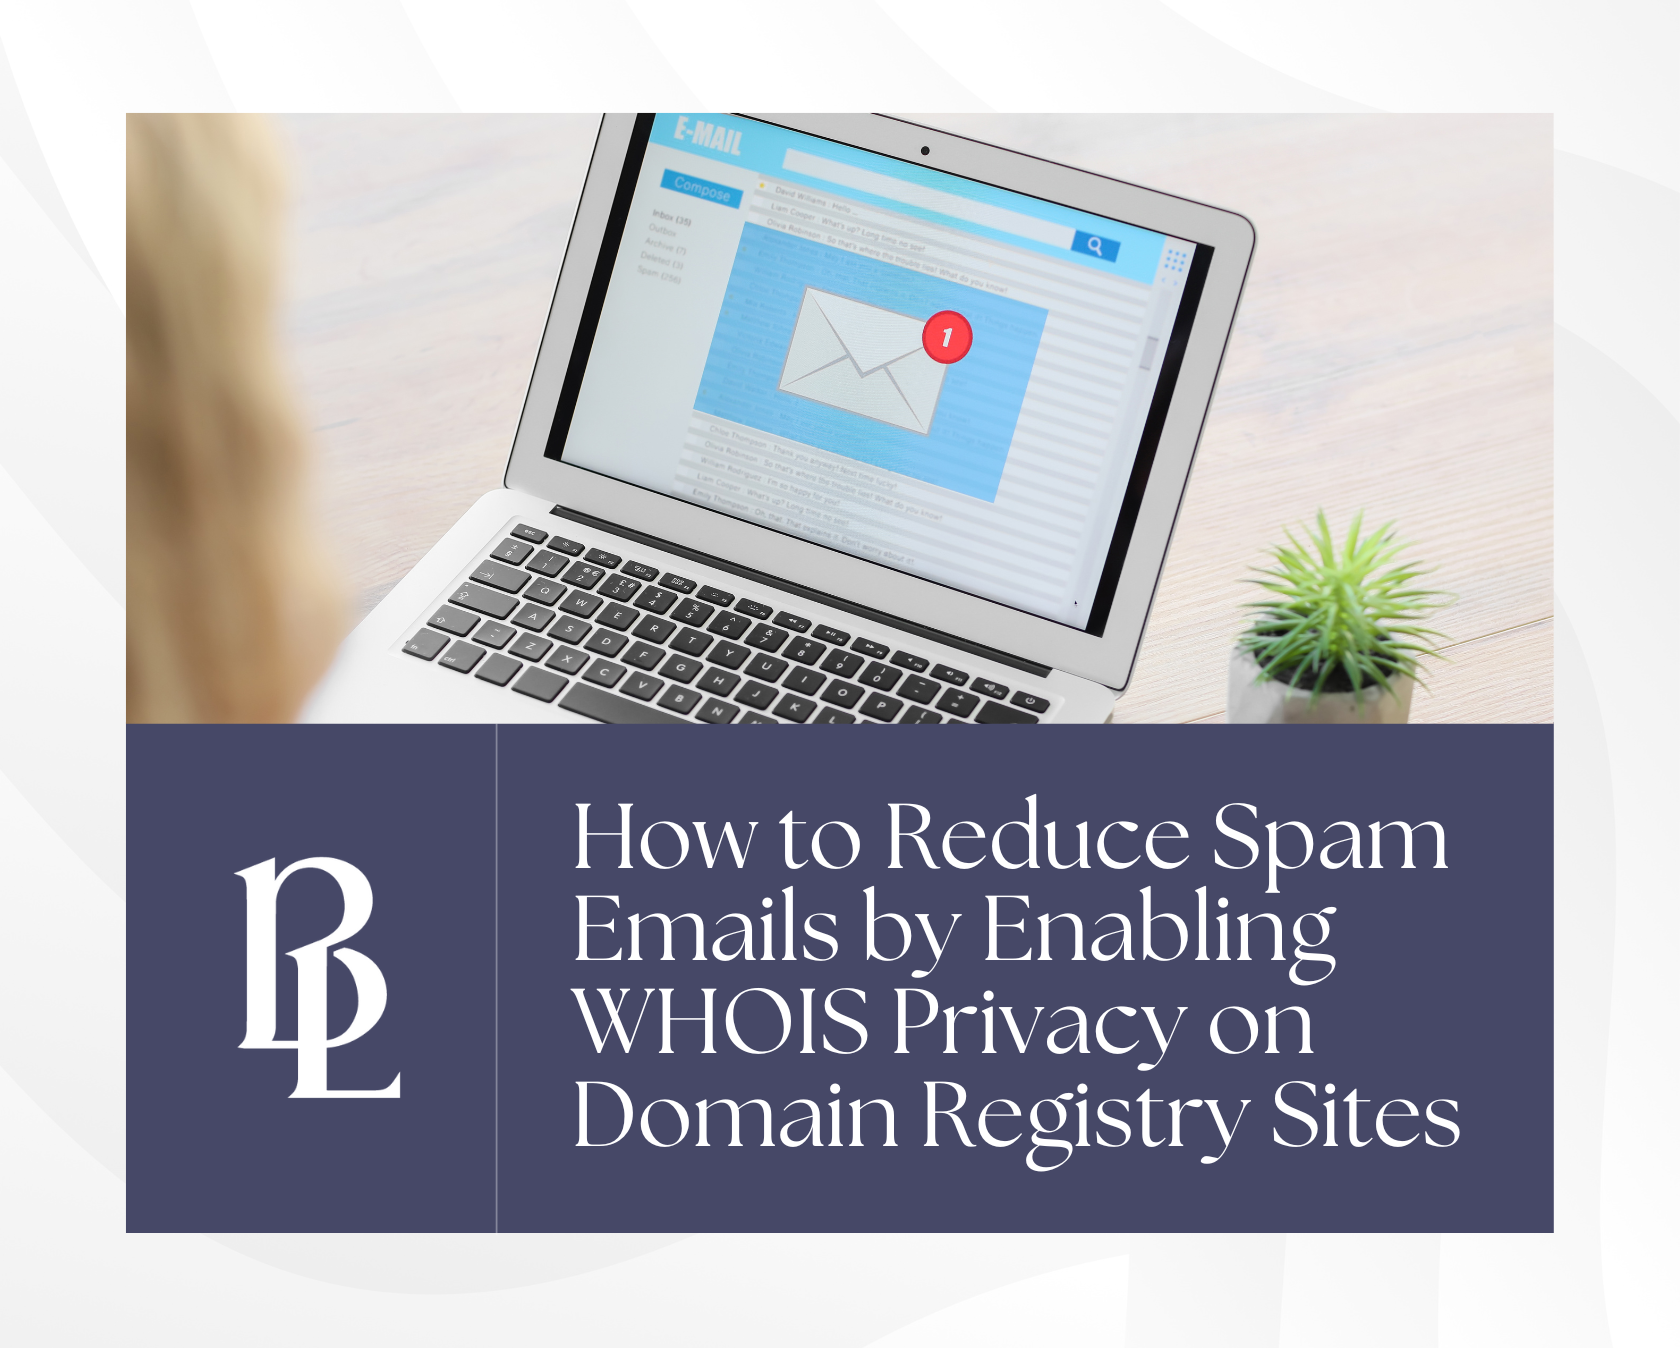 How to reduce spam emails by enabling whois privacy on Google Business Profile domain registry sites.